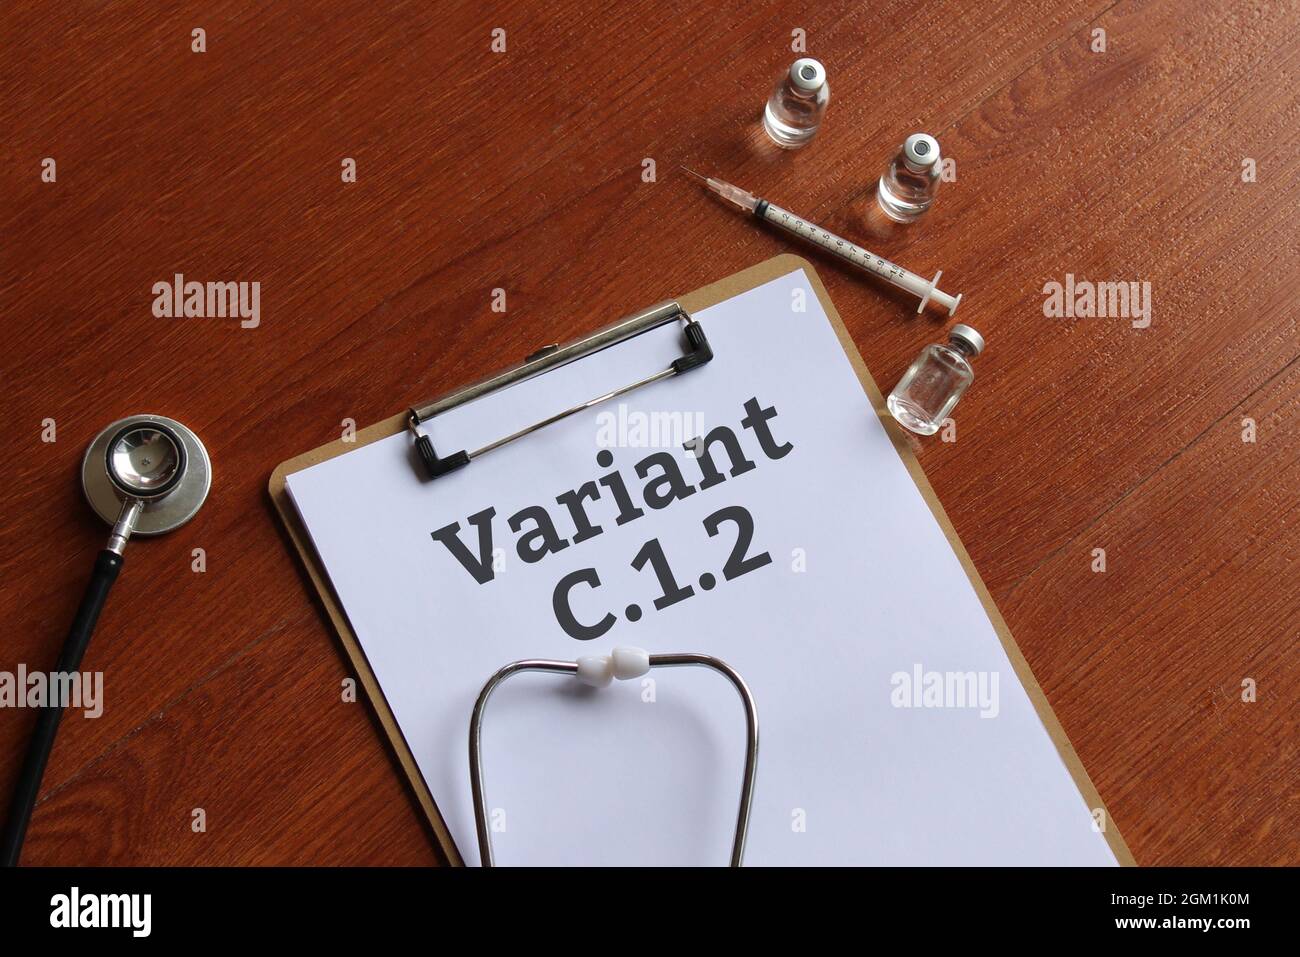 Medical concept. Top view of paper clipboard with text Covid-19 variant C.1.2, stethoscope, glass vial and syringe. Stock Photo